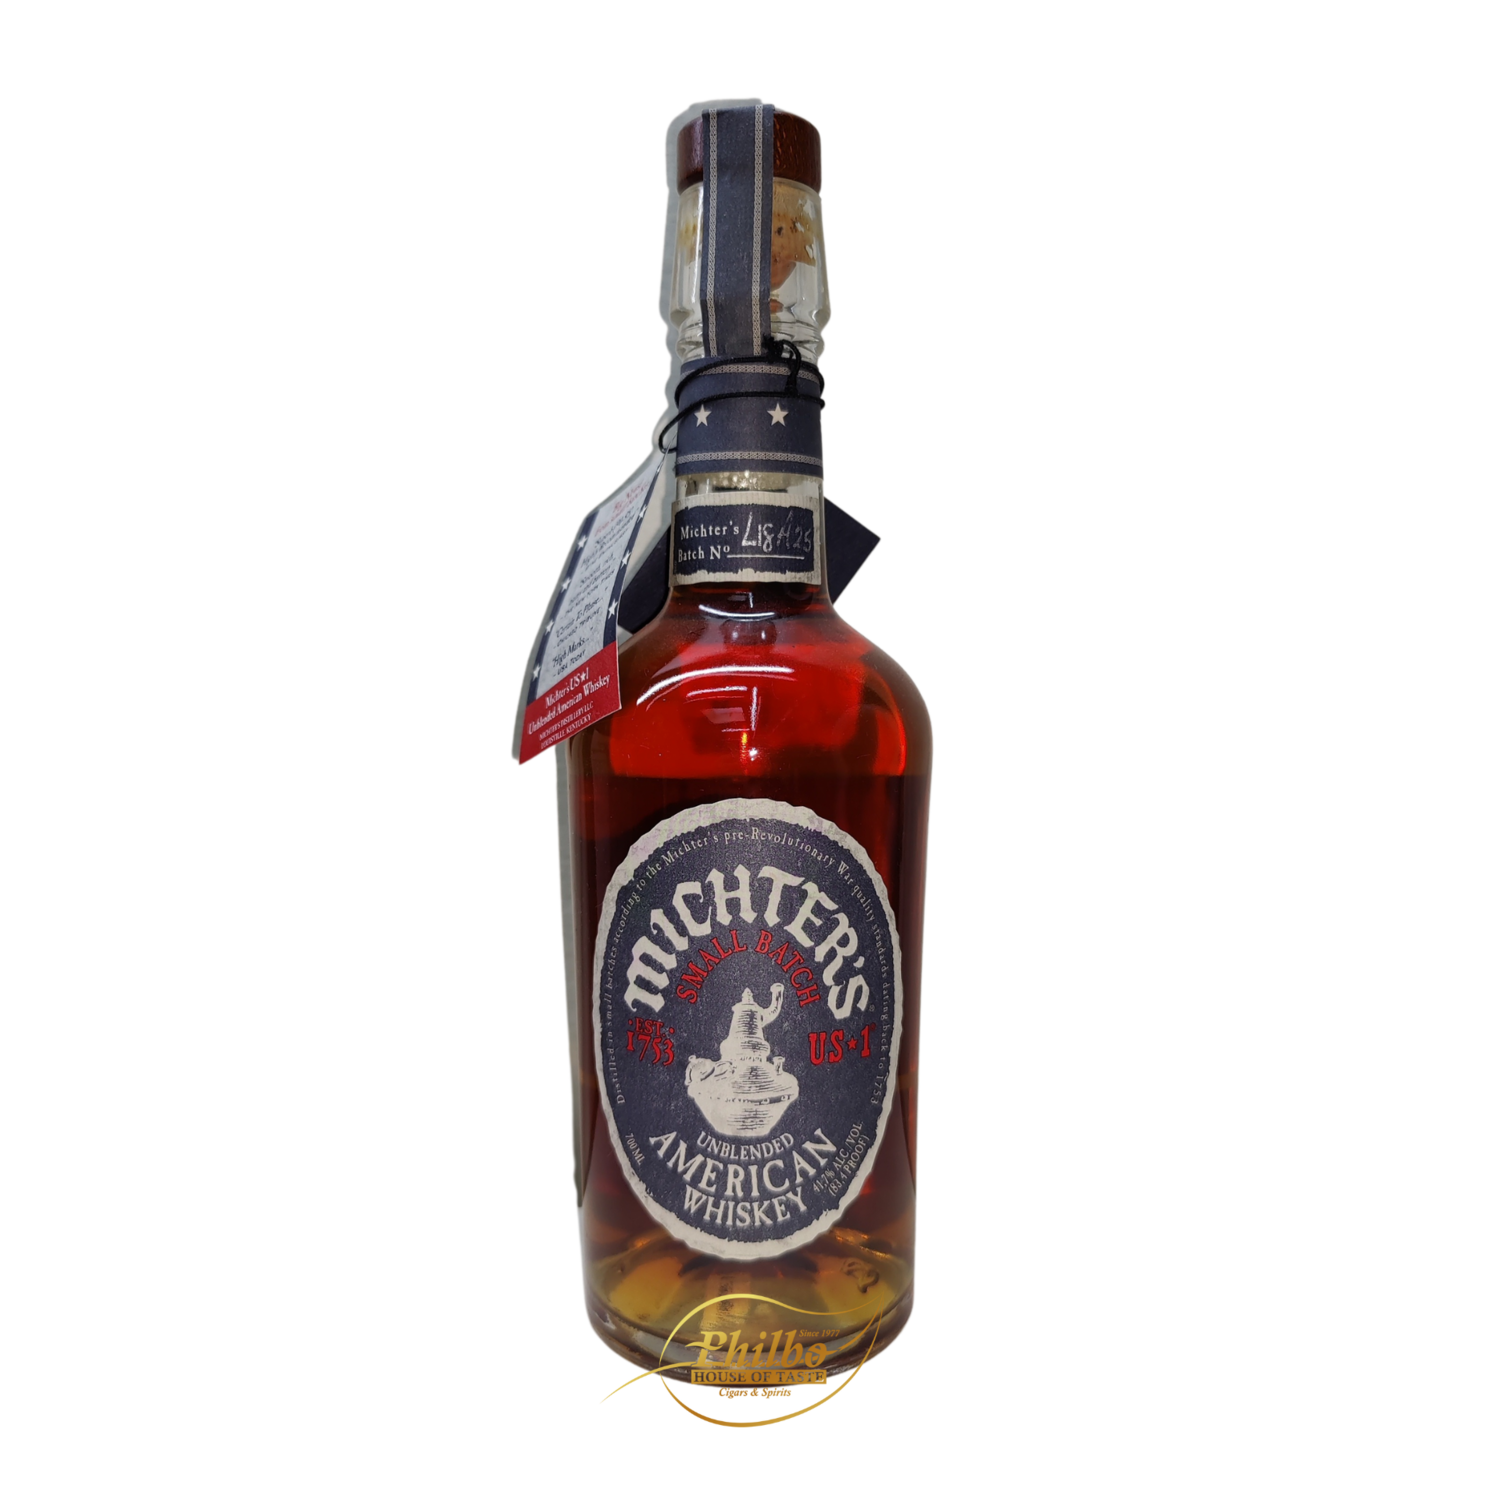 Michter's US 1 Unblended American Whisky 41.7% 700ml